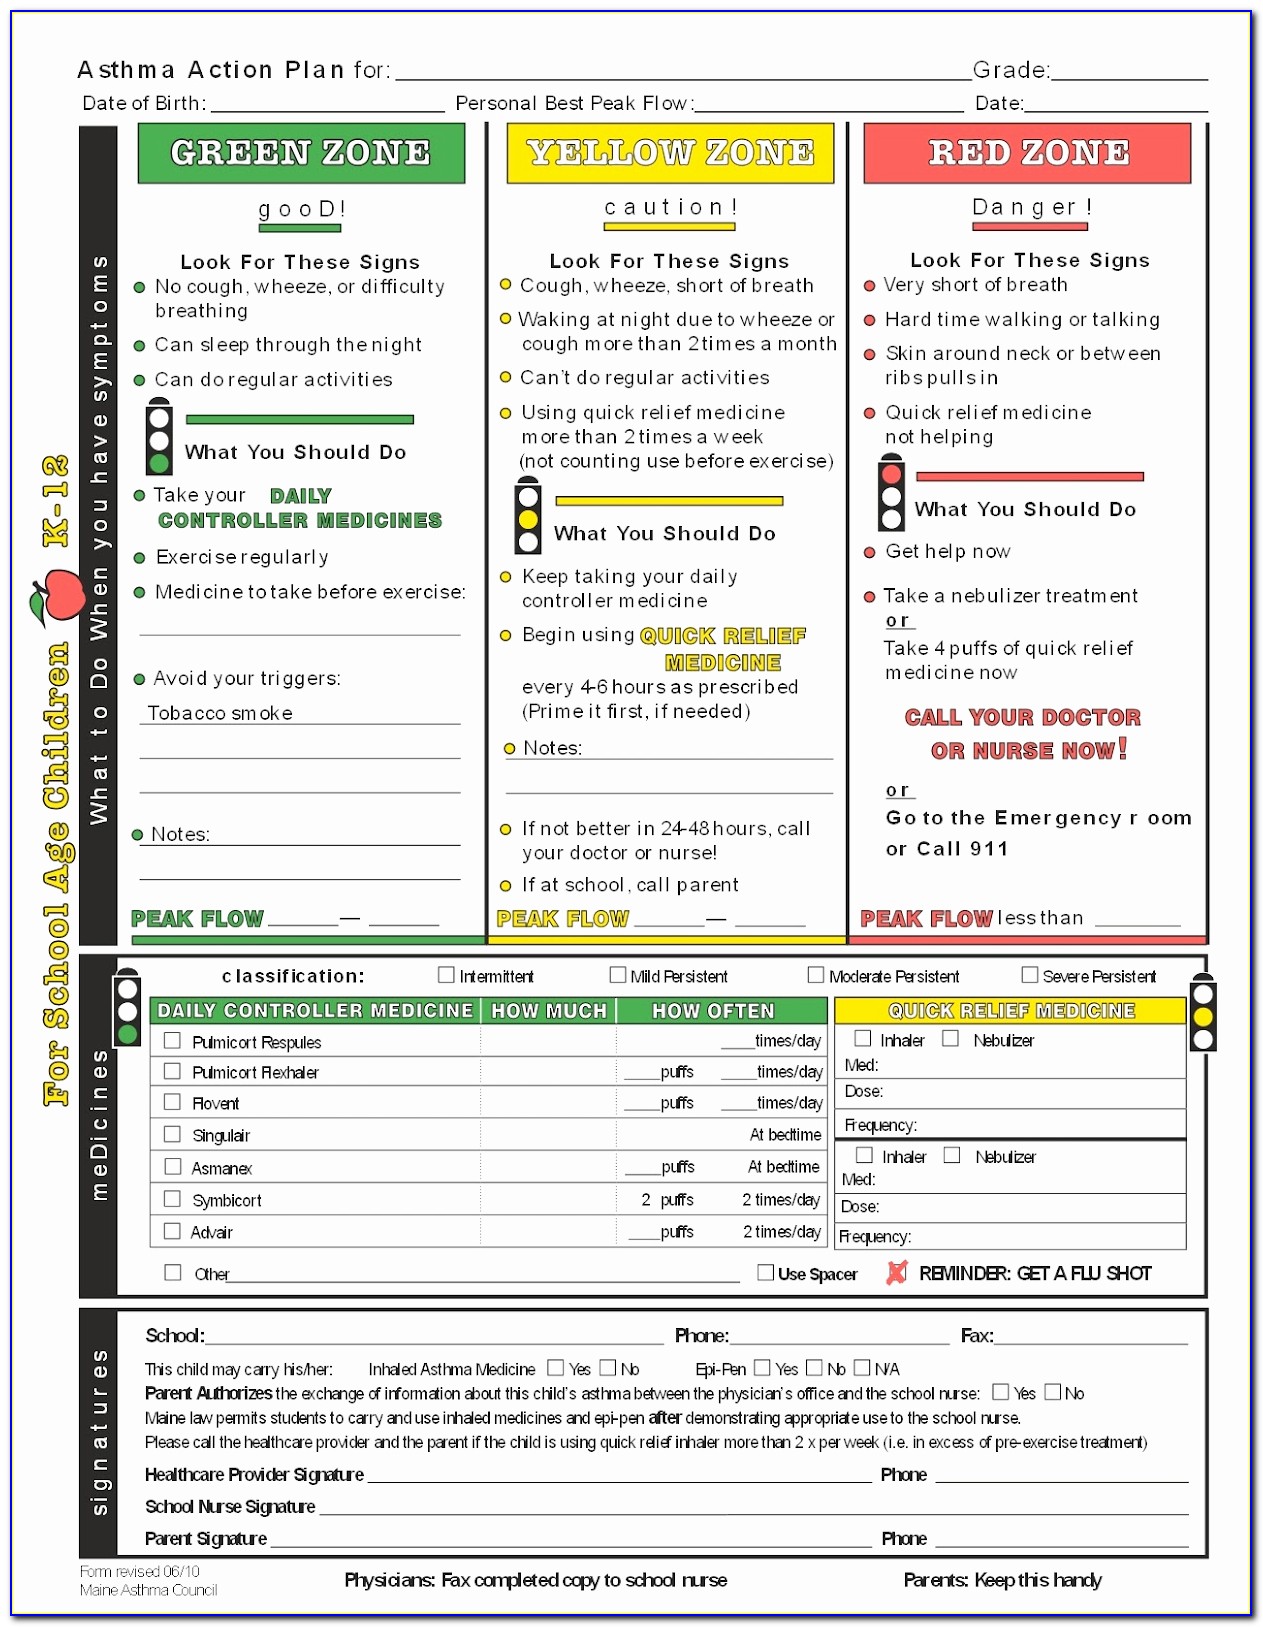 asthma-action-plan-form-for-school